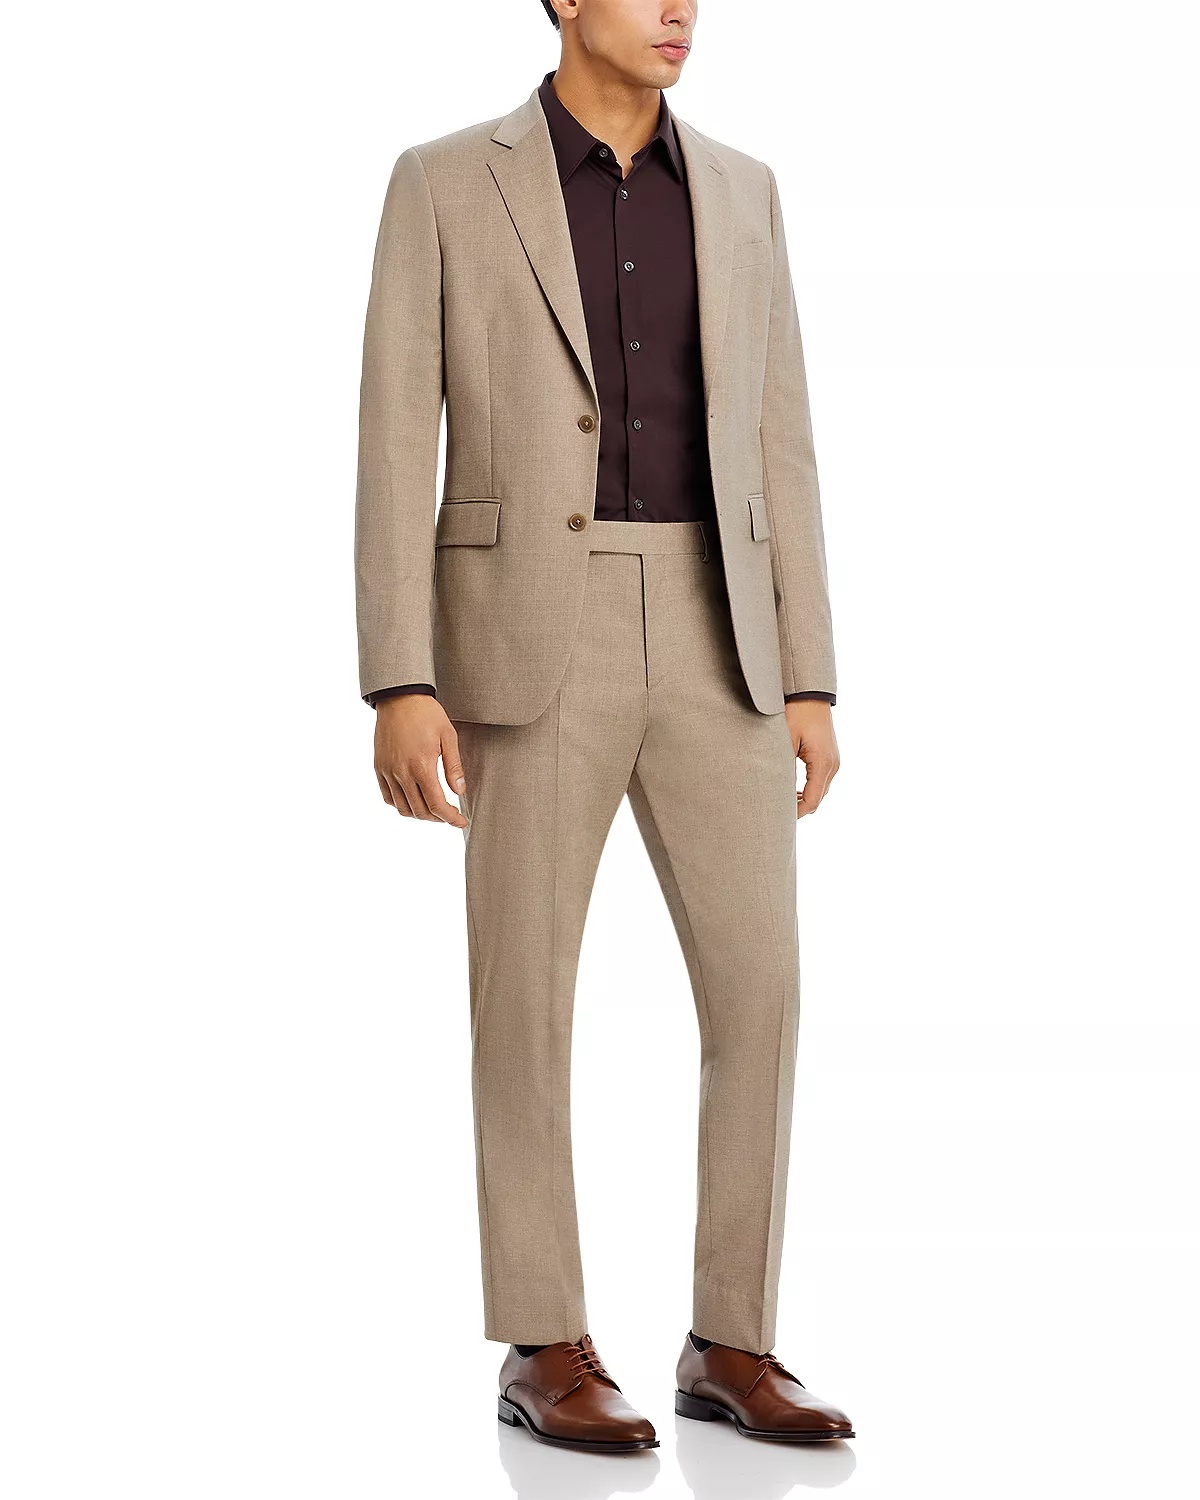 Brierly Tailored Fit Suit - 1